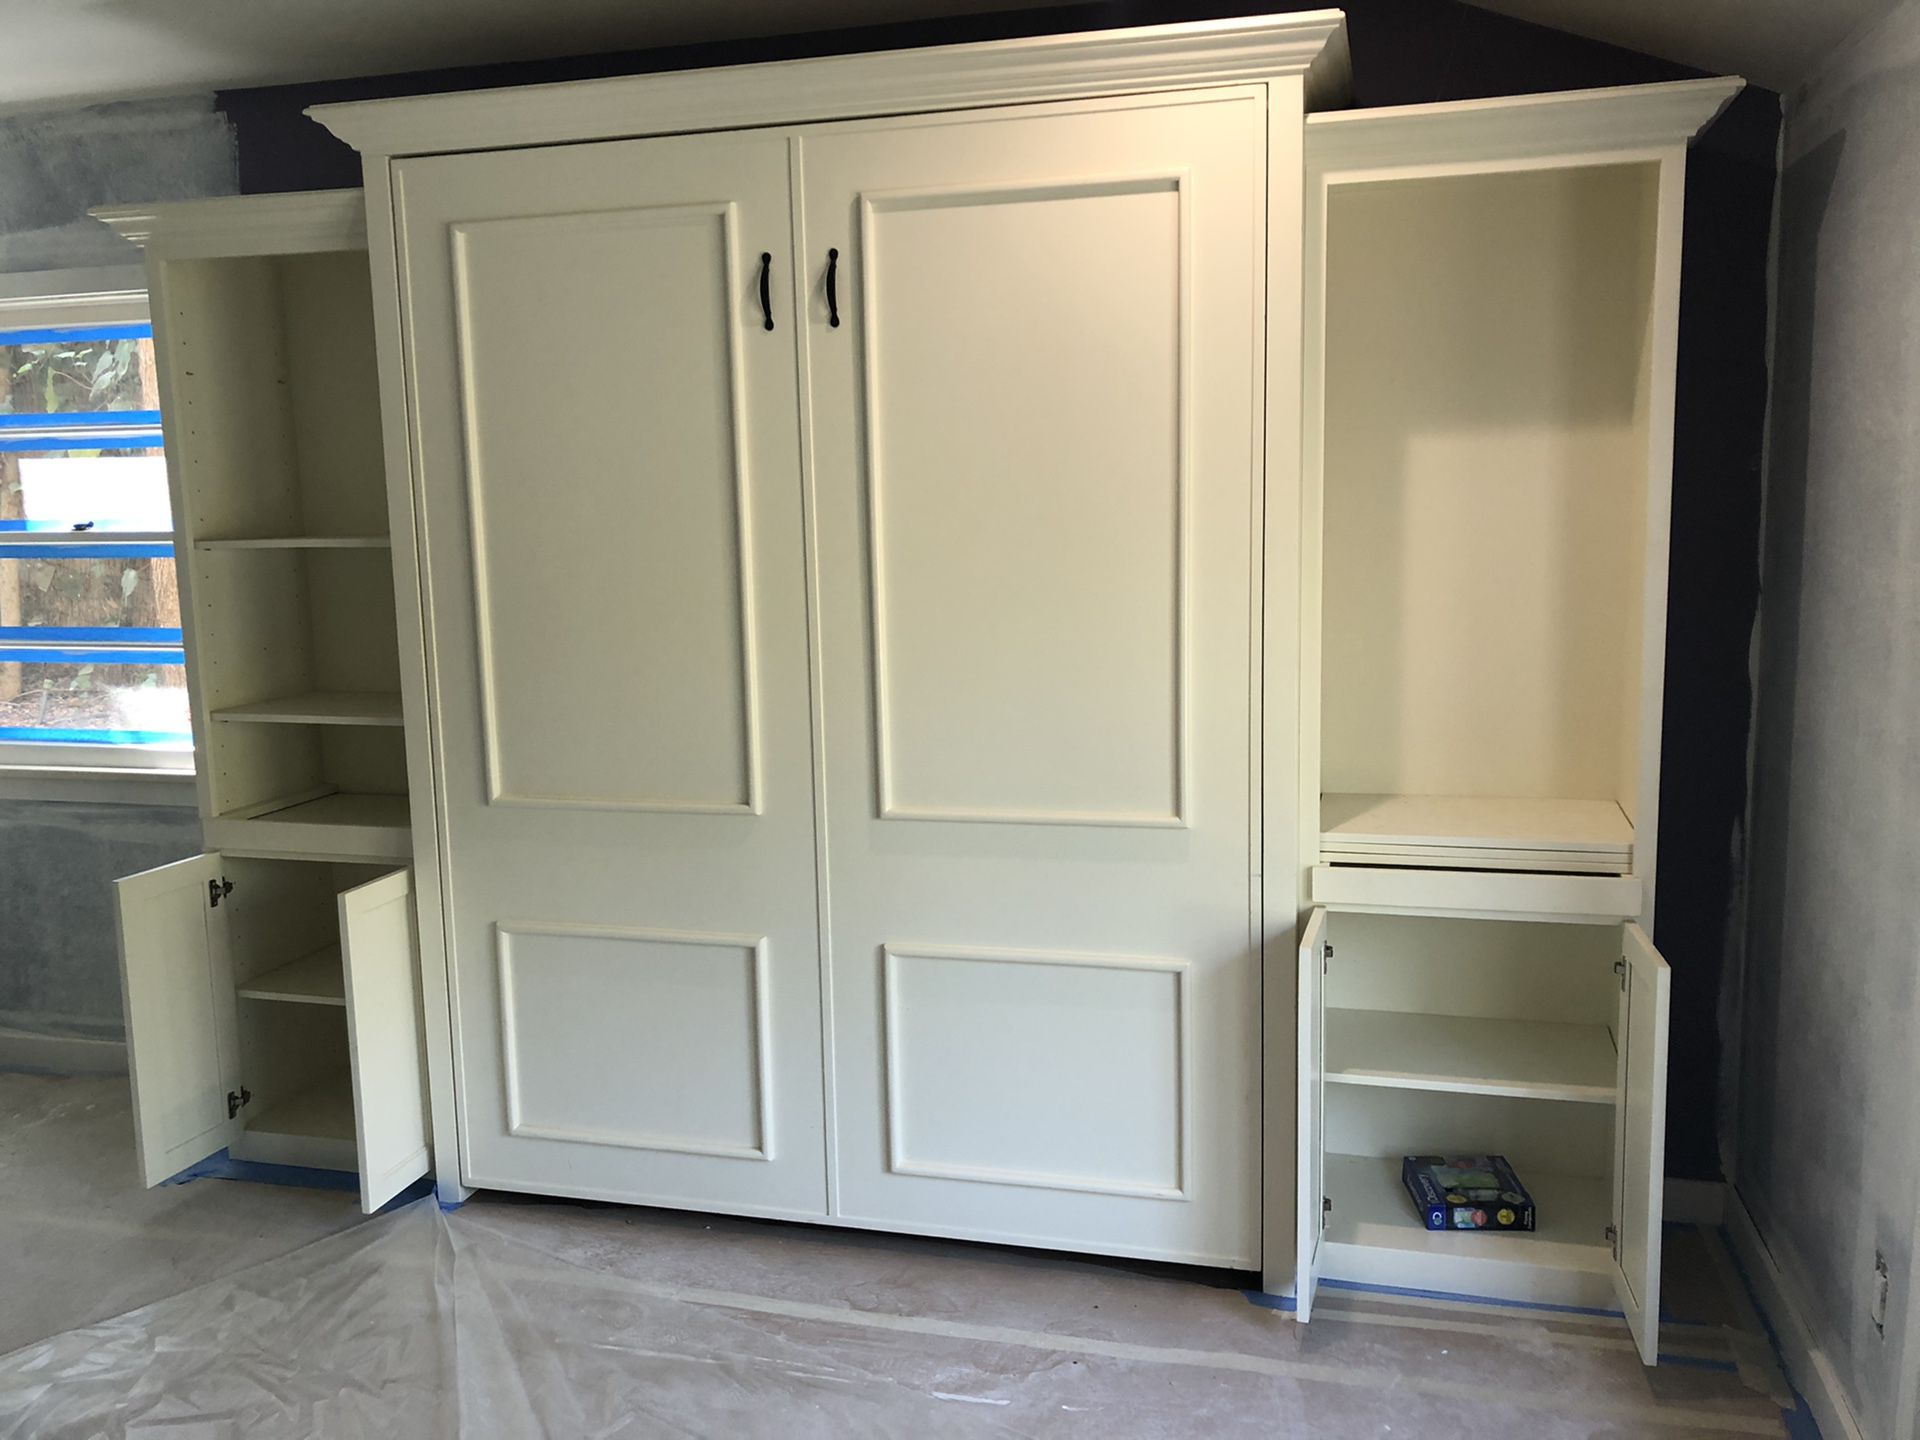 Murphy Bed with cabinets and bookshelves